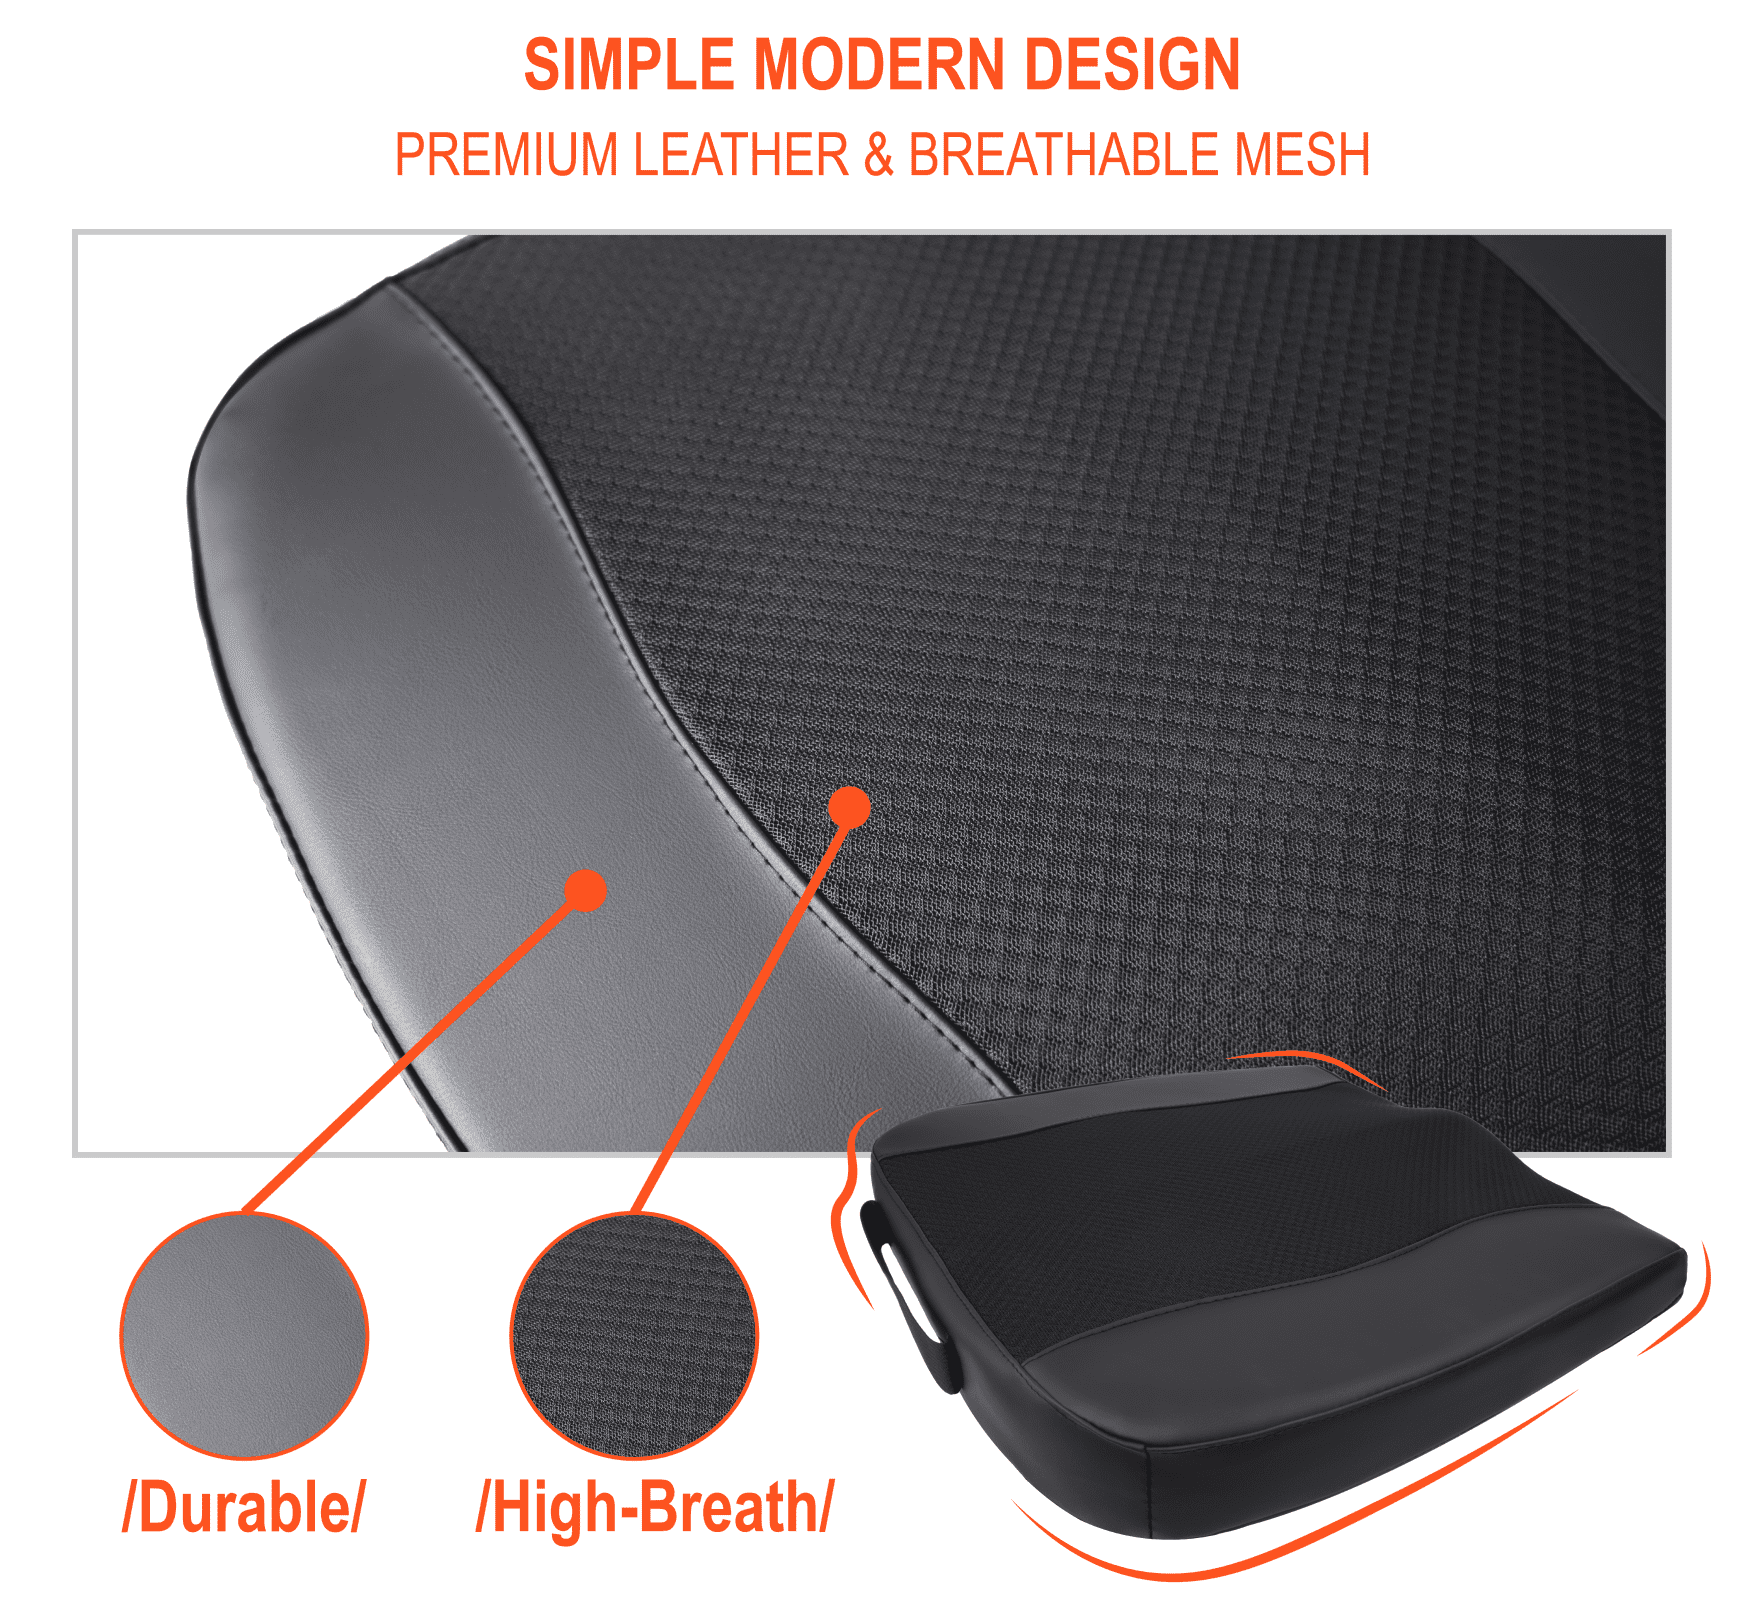 Lofty Aim Premium Car Seat Cushion, Driver Seat Cushion with Comfort Memory  Foam & Non-Slip Rubber Bottom, Car Seat Pad Works with 95% of Vehicles and